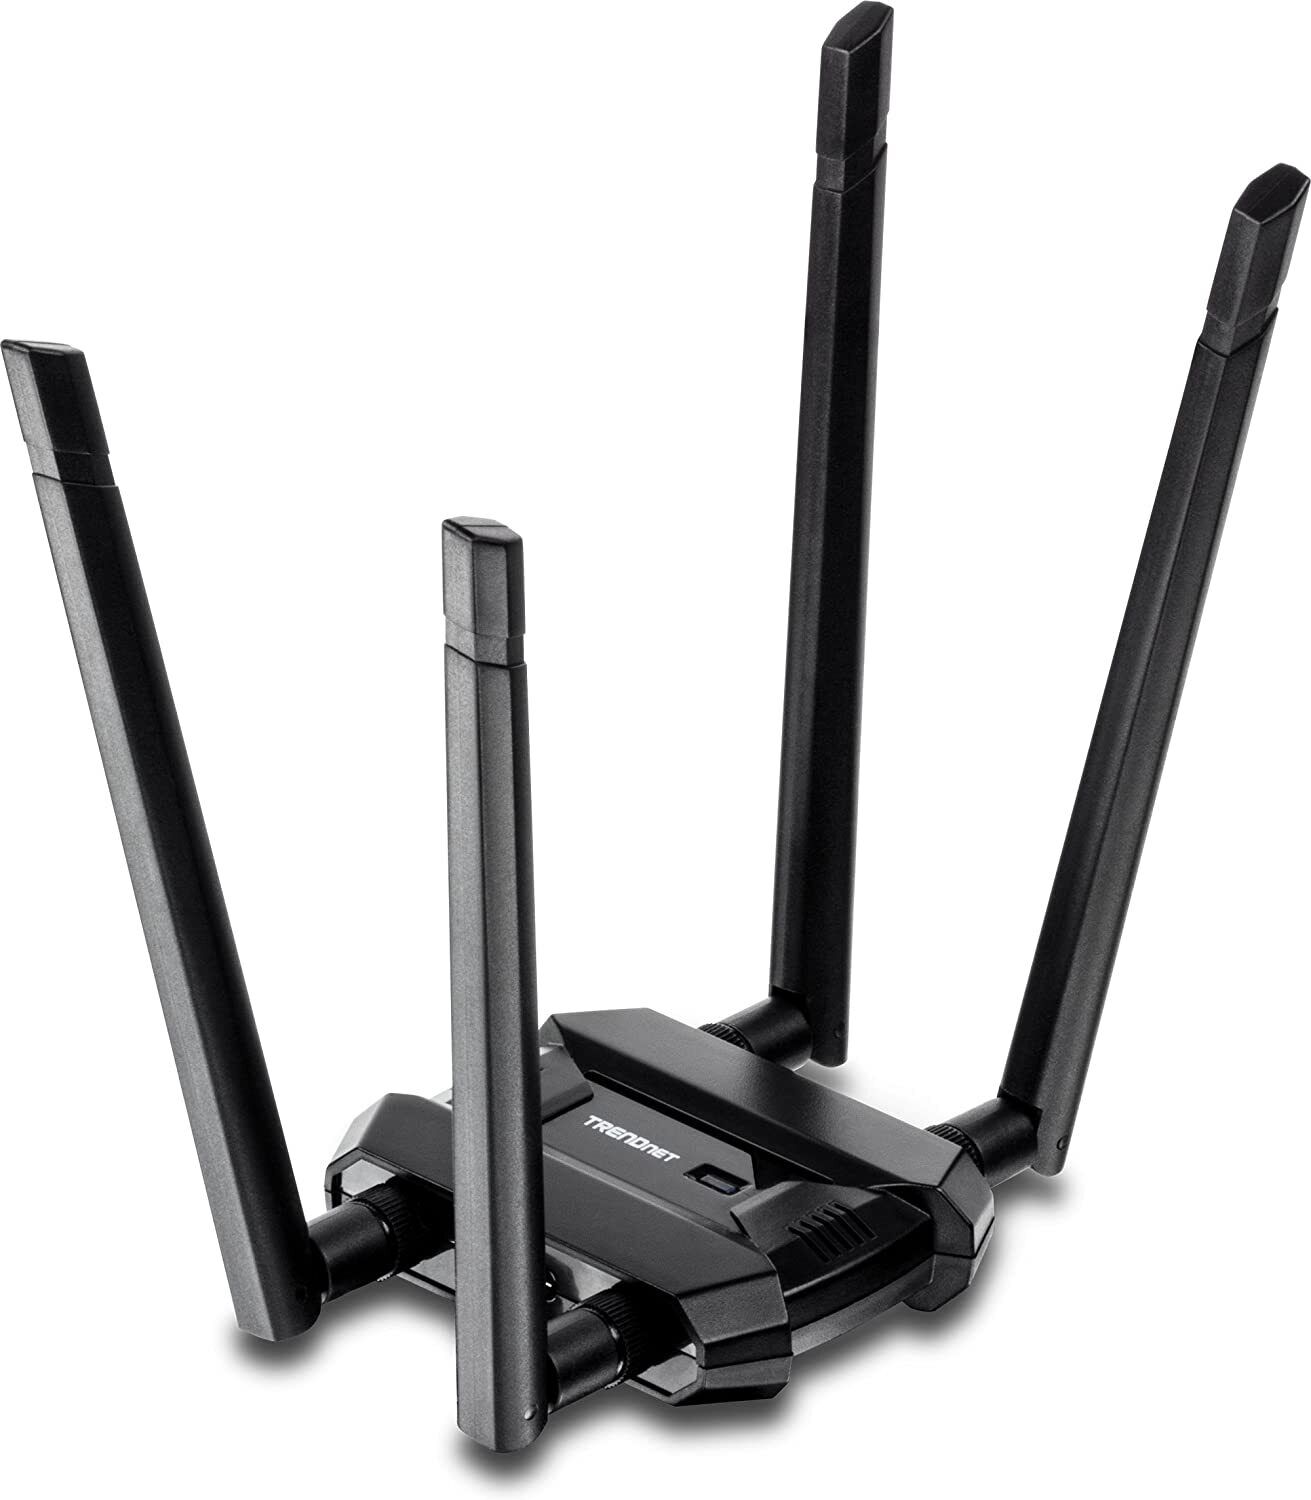 TRENDnet AC1900 High Power Dual Band Increase-Extend WiFi Wireless Coverage